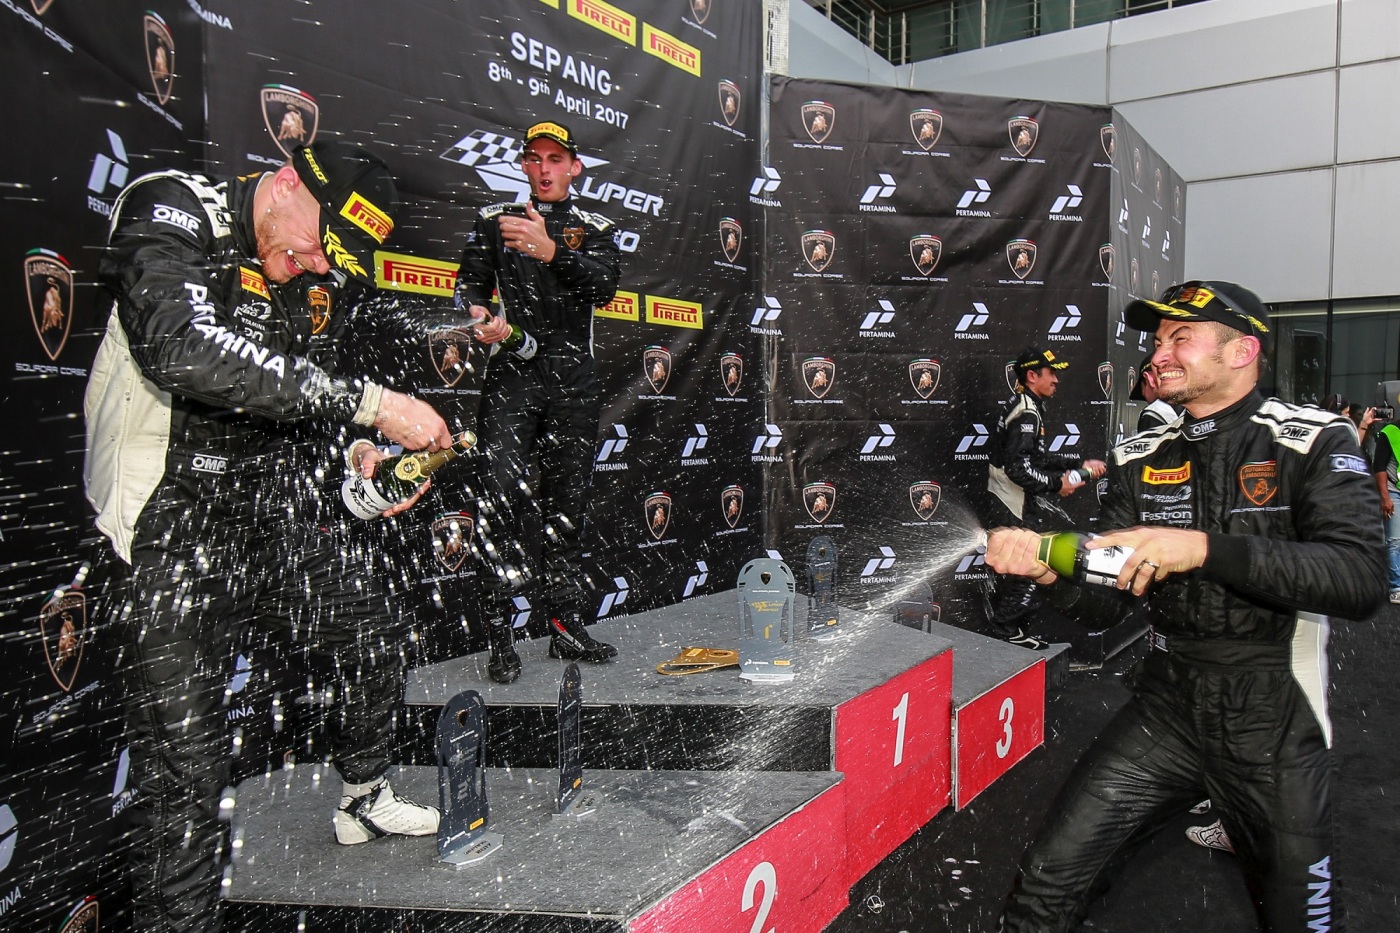 Racing Action In Sepang Continues With Thrilling Race Two at Malaysian Round-celebration